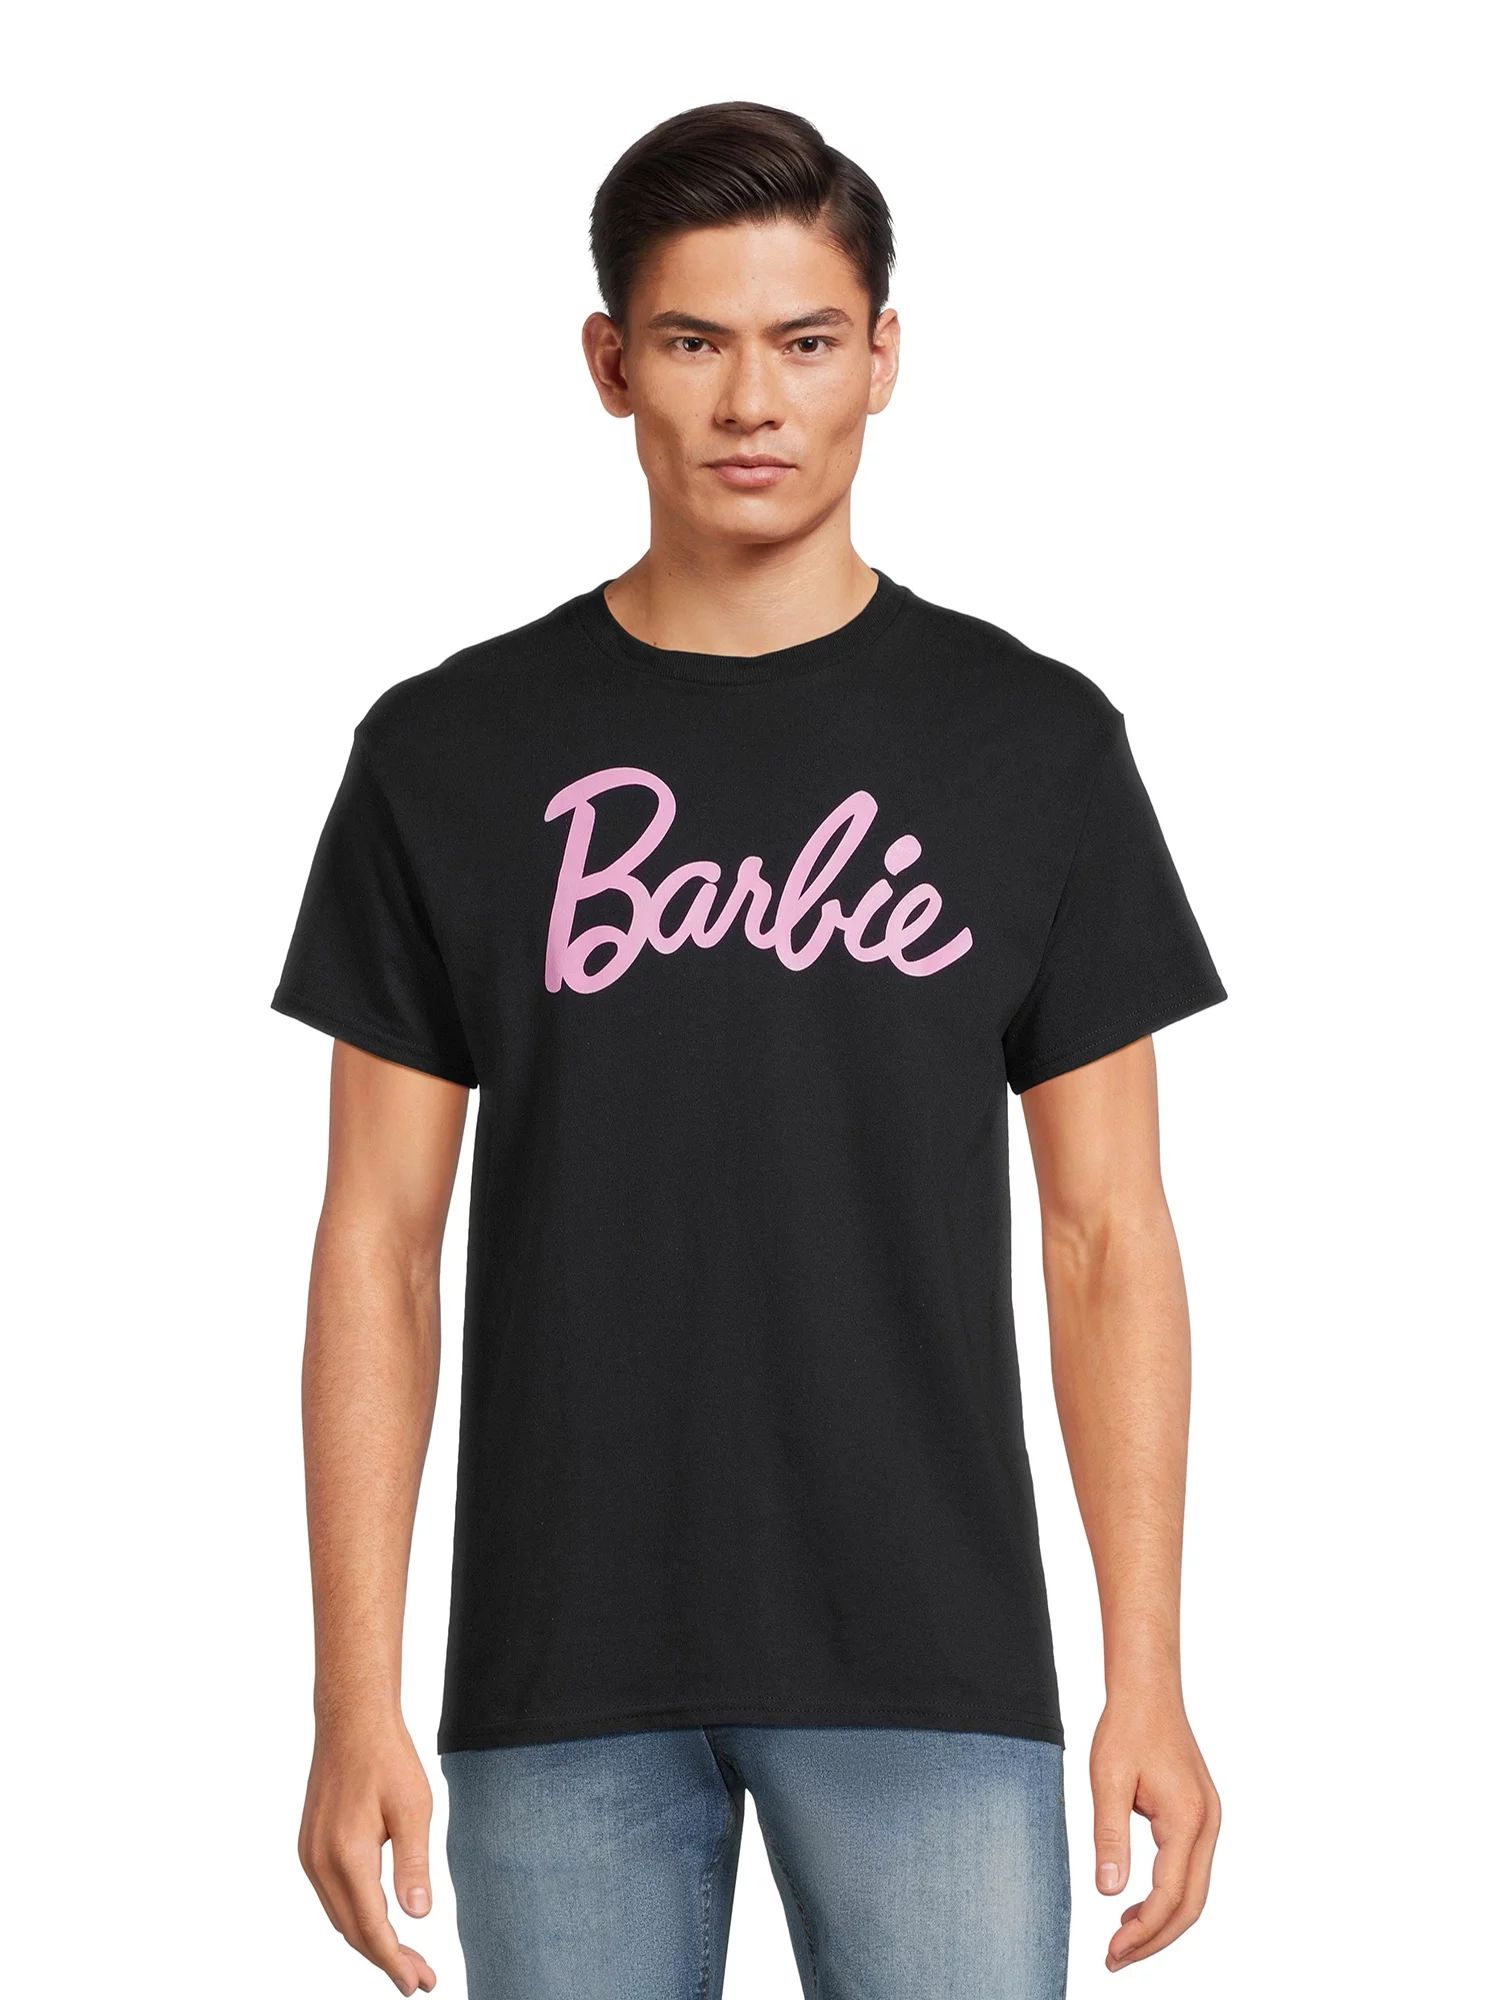 Barbie Men's Logo Graphic Tee with Short Sleeves, Sizes S-3XL | Walmart (US)